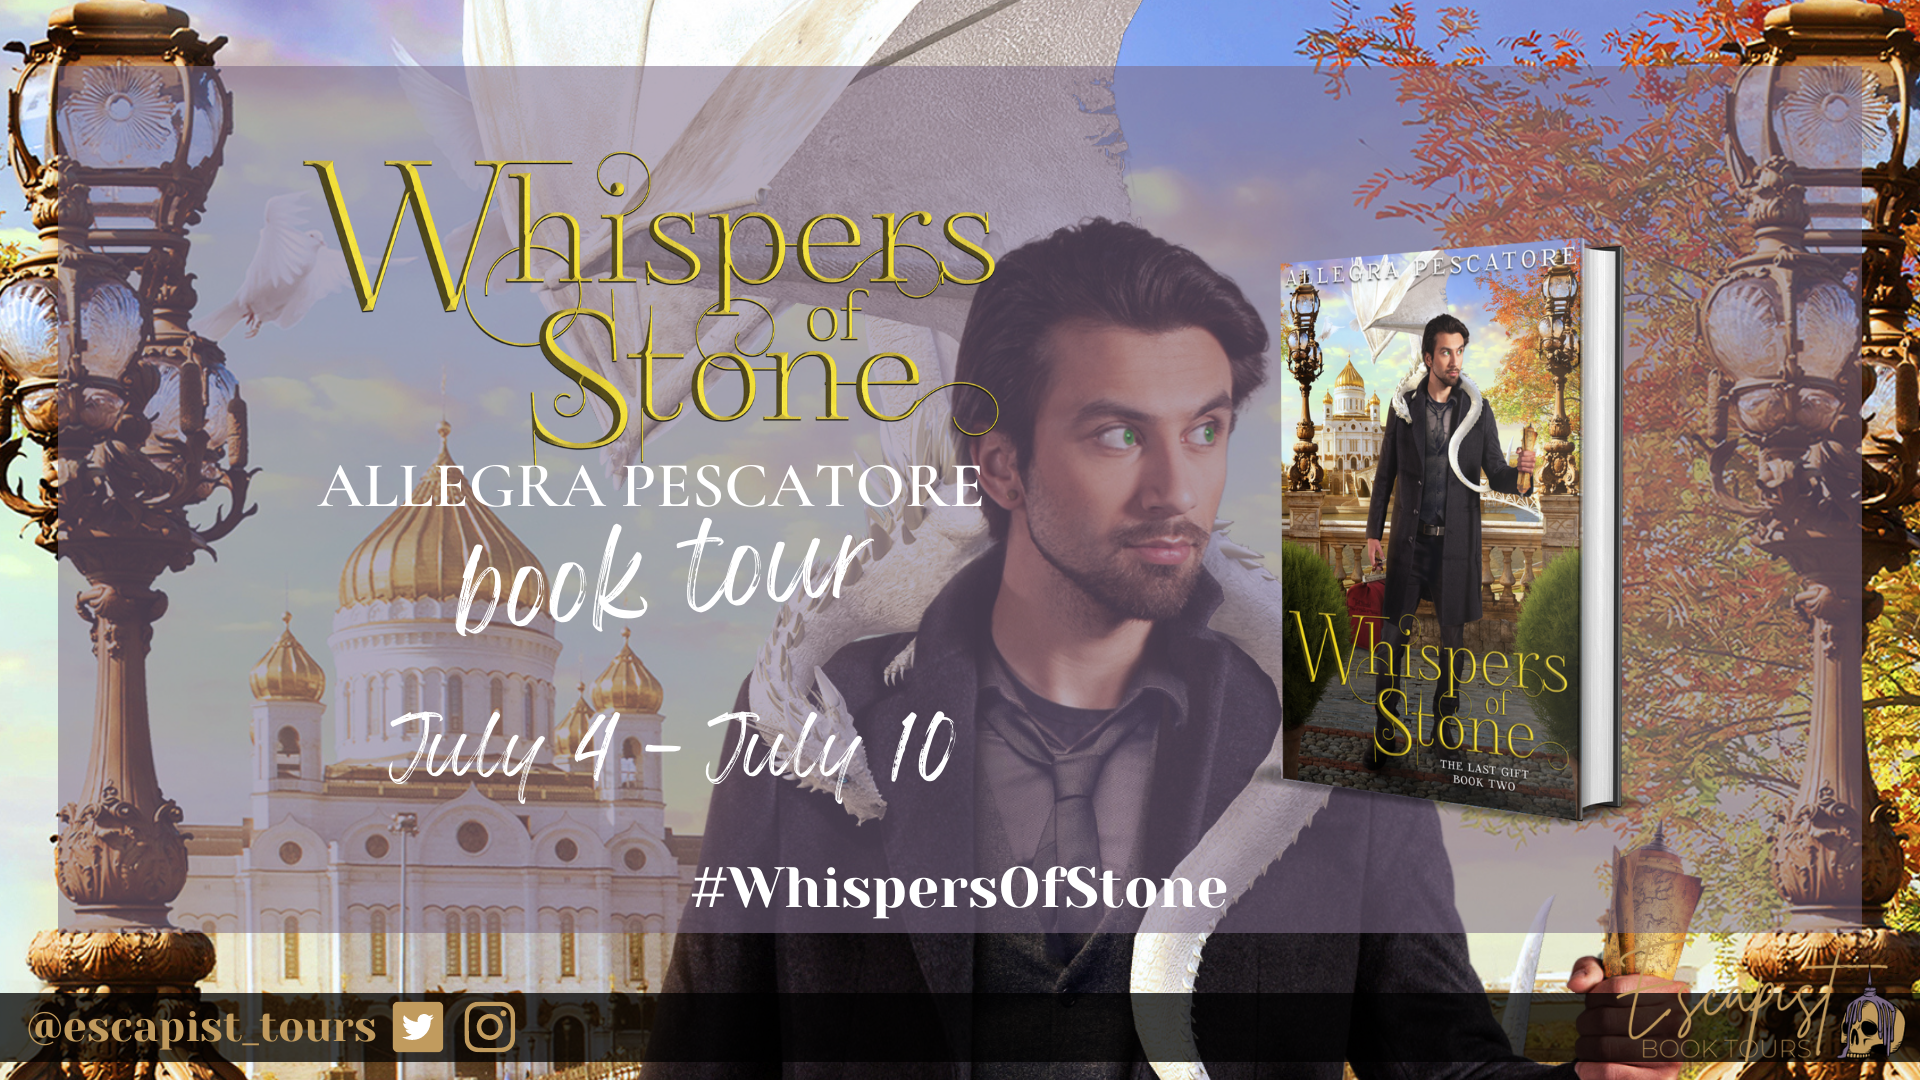 Whispers of Stone blog announcement